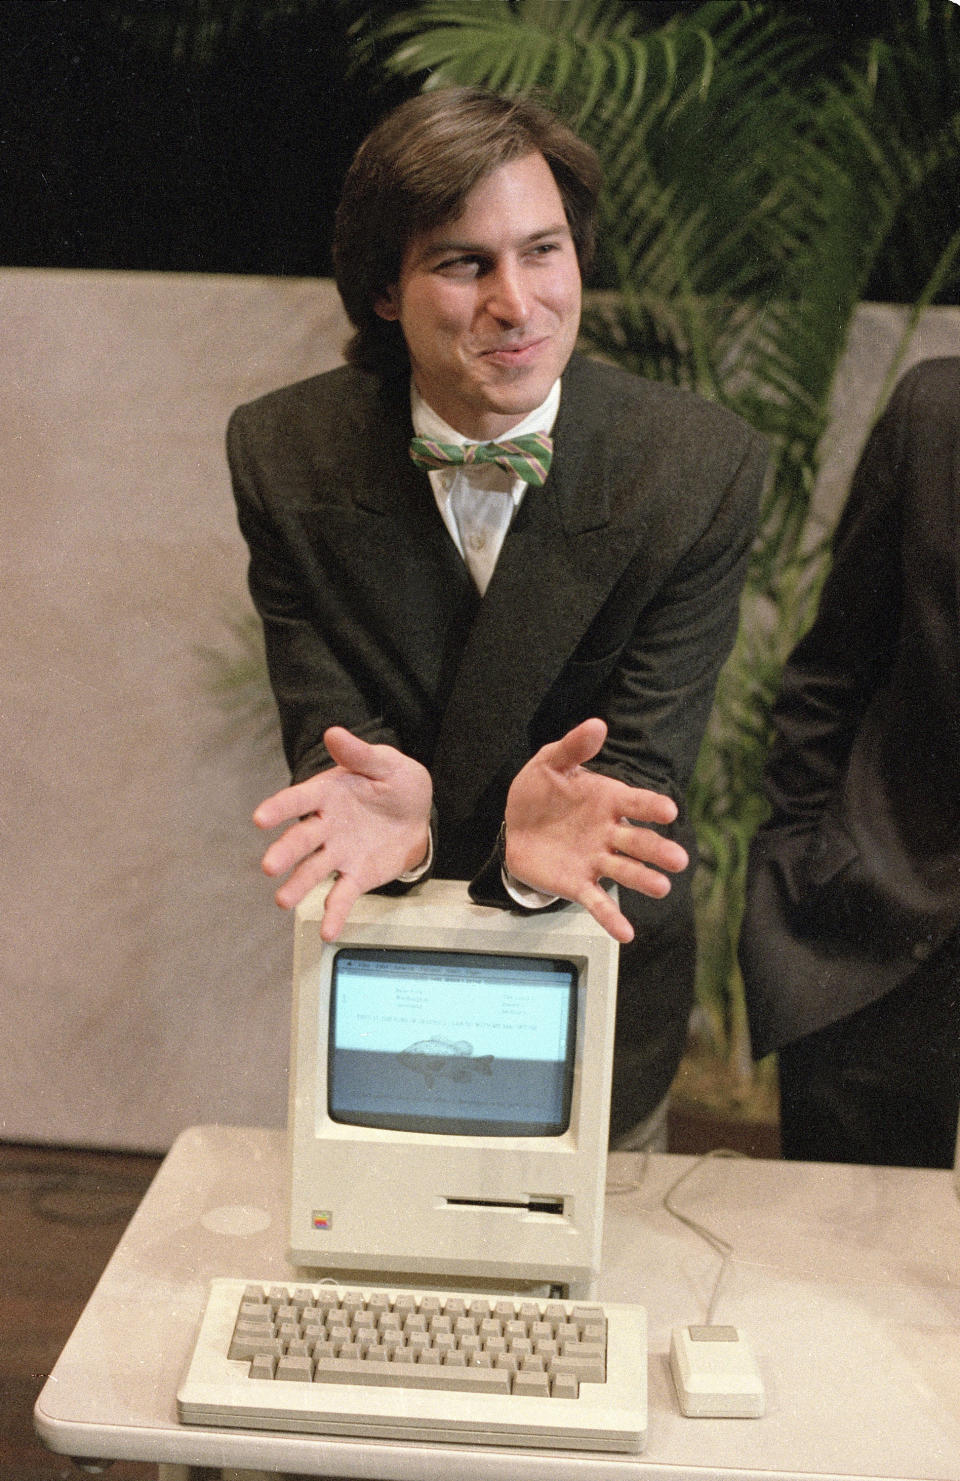 File - Steven Jobs, then chairman of the board of Apple Computer, leans on the new Macintosh personal computer following a shareholder's meeting Jan. 24, 1984 in Cupertino, Ca. The Macintosh computer lived up to the revolutionary promise made by Apple co-founder Jobs at it's 1984 unveiling. (AP Photo/Paul Sakuma, File)